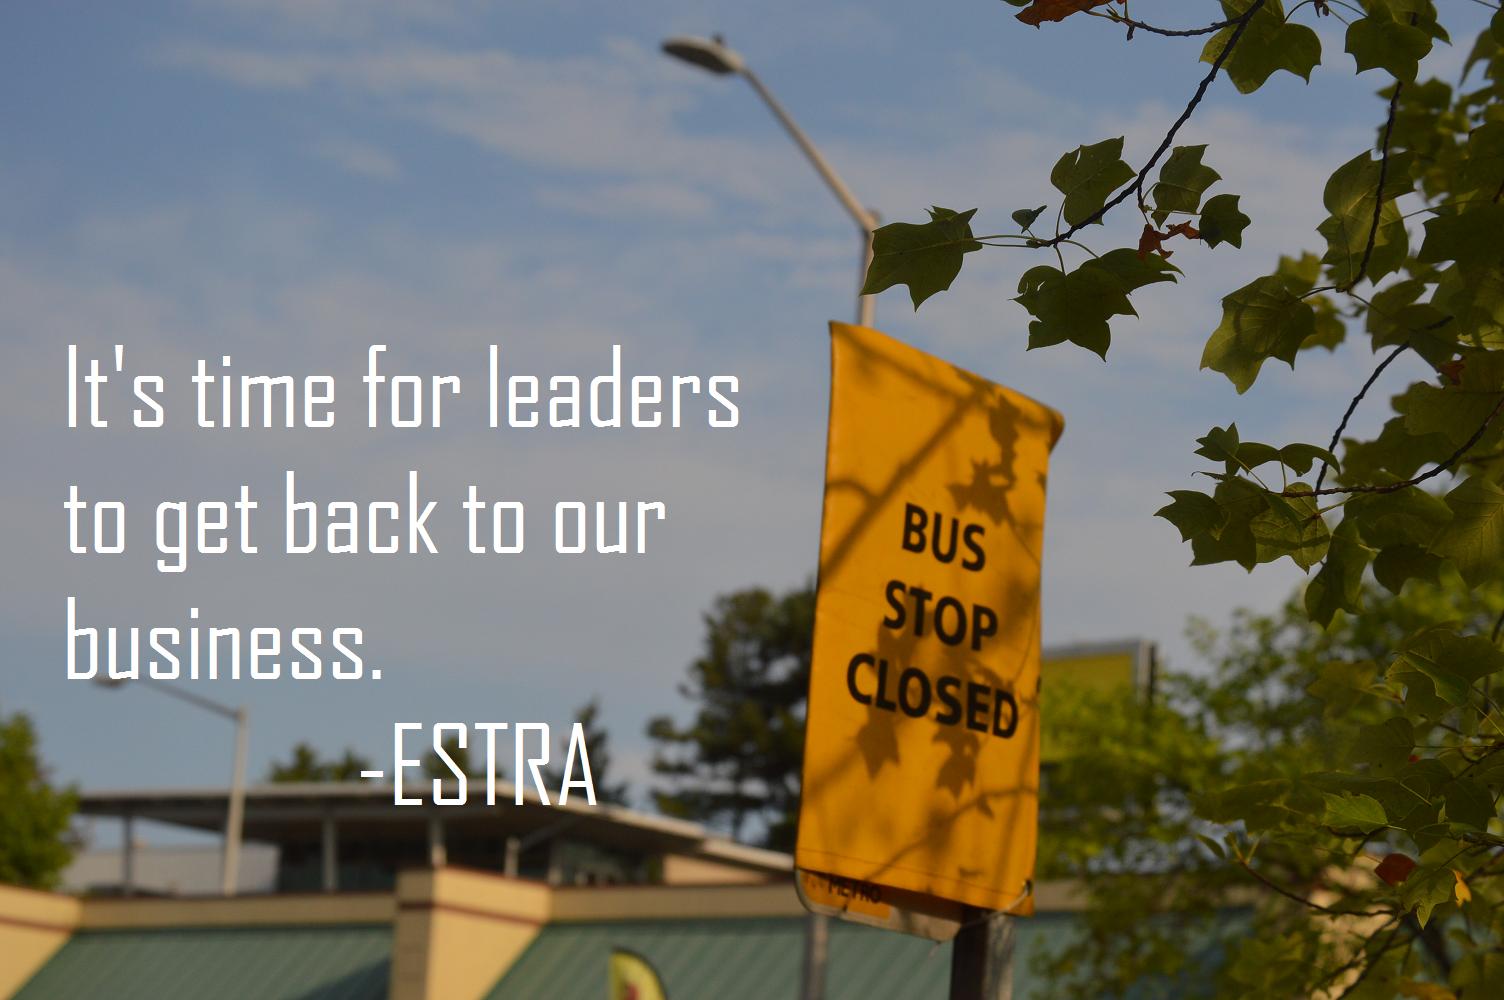 Businesses closing, not enough full-time jobs, and American Money abroad. Time to rethink whom should lead us. - ESTRA Seattle